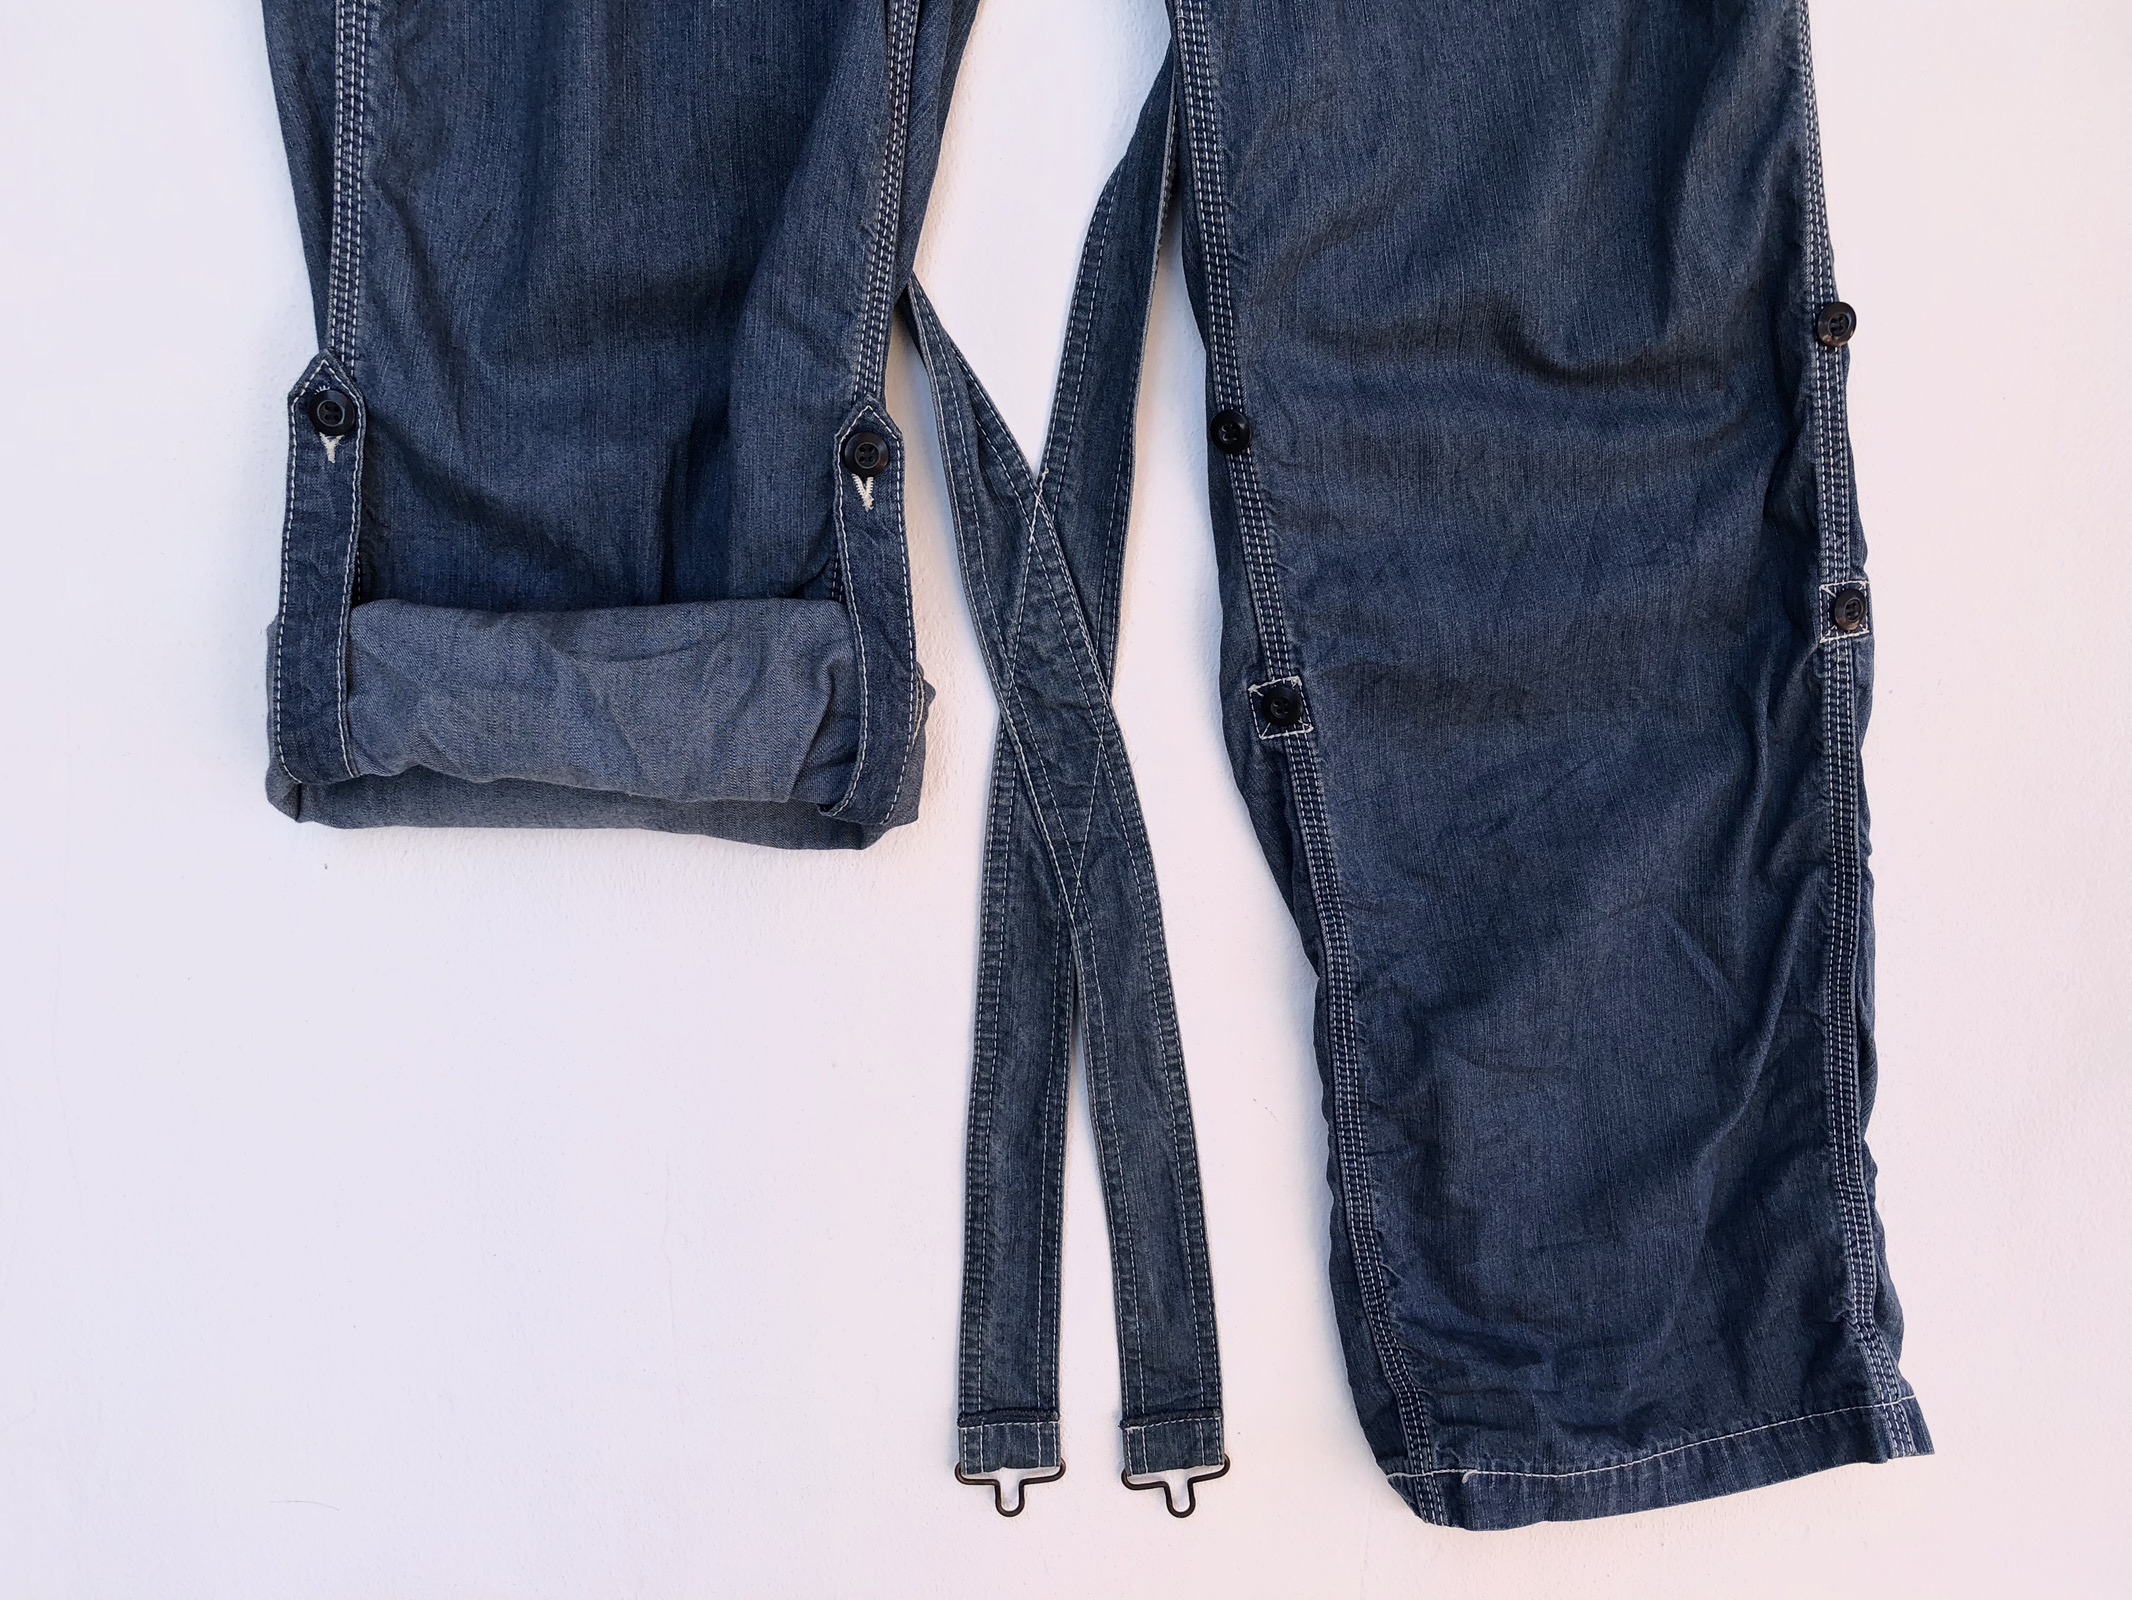 Workers - JAPANESE BRAND RAGEBLUE OVERALL WORKWEAR STYLE - 9